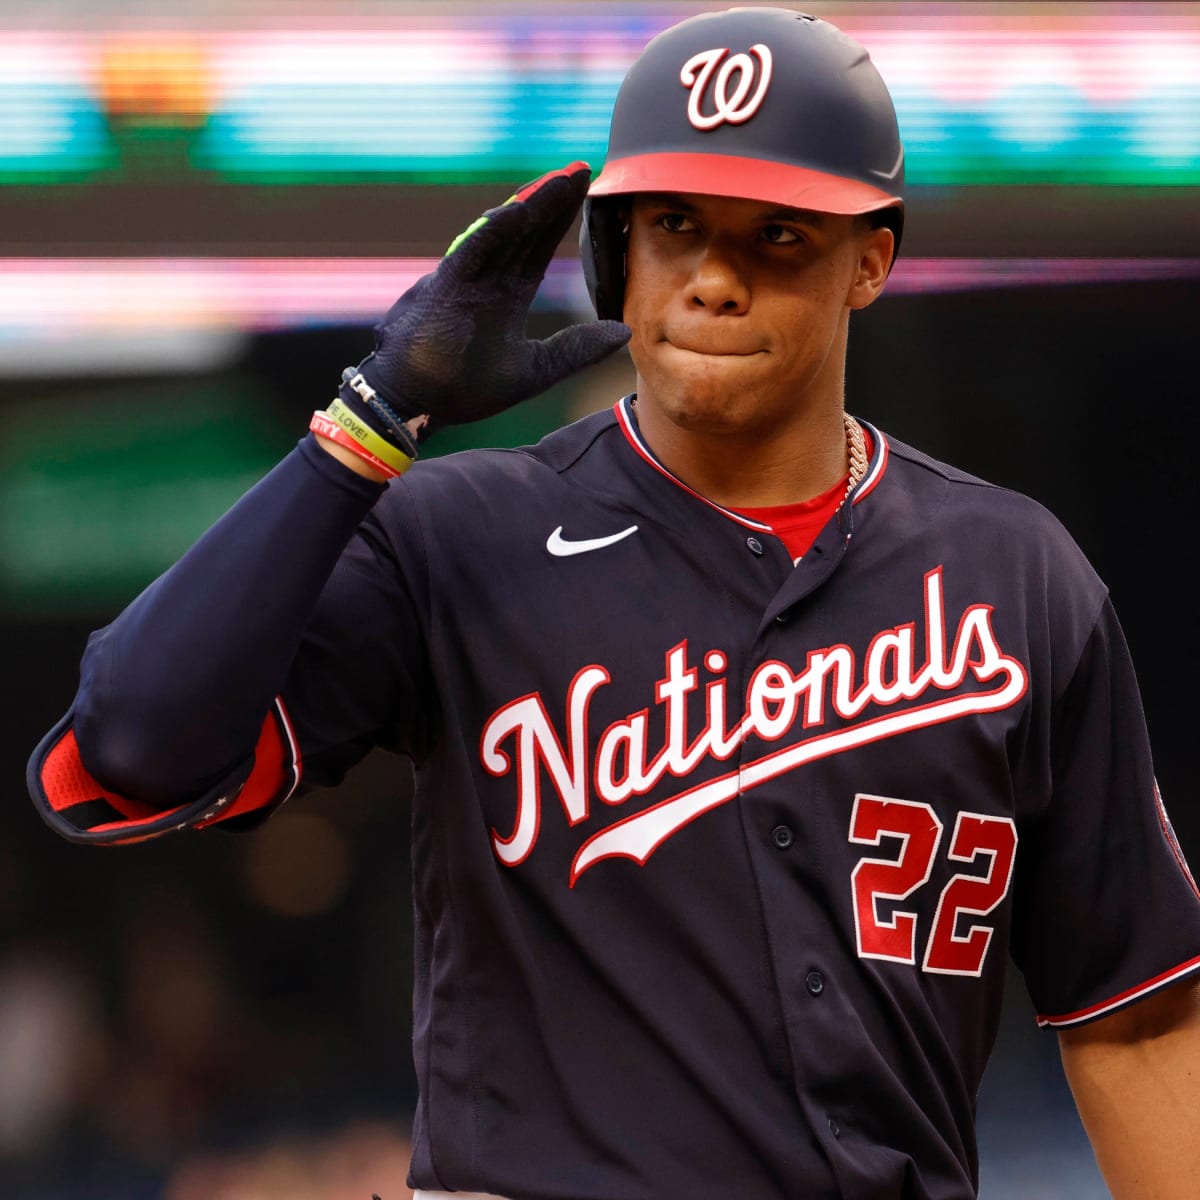 Juan Soto Jerseys & Gear  Curbside Pickup Available at DICK'S